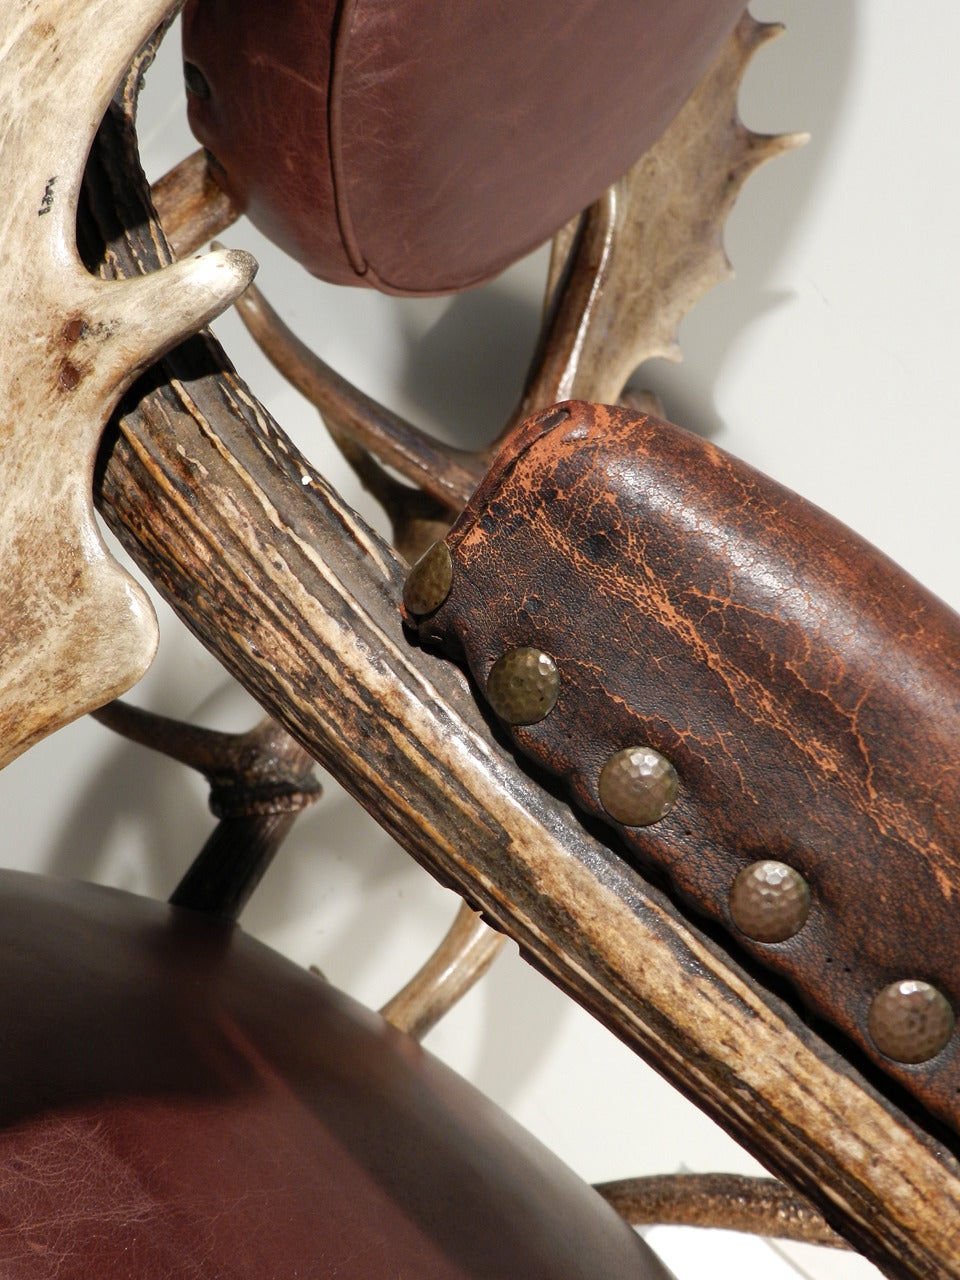 Trophies have been used decorate log cabins and hunting lodges for many a long years. The tradition goes back to the early 19th century. It takes some skill as well as a good eye to create a winning example like this. The original leather pads are